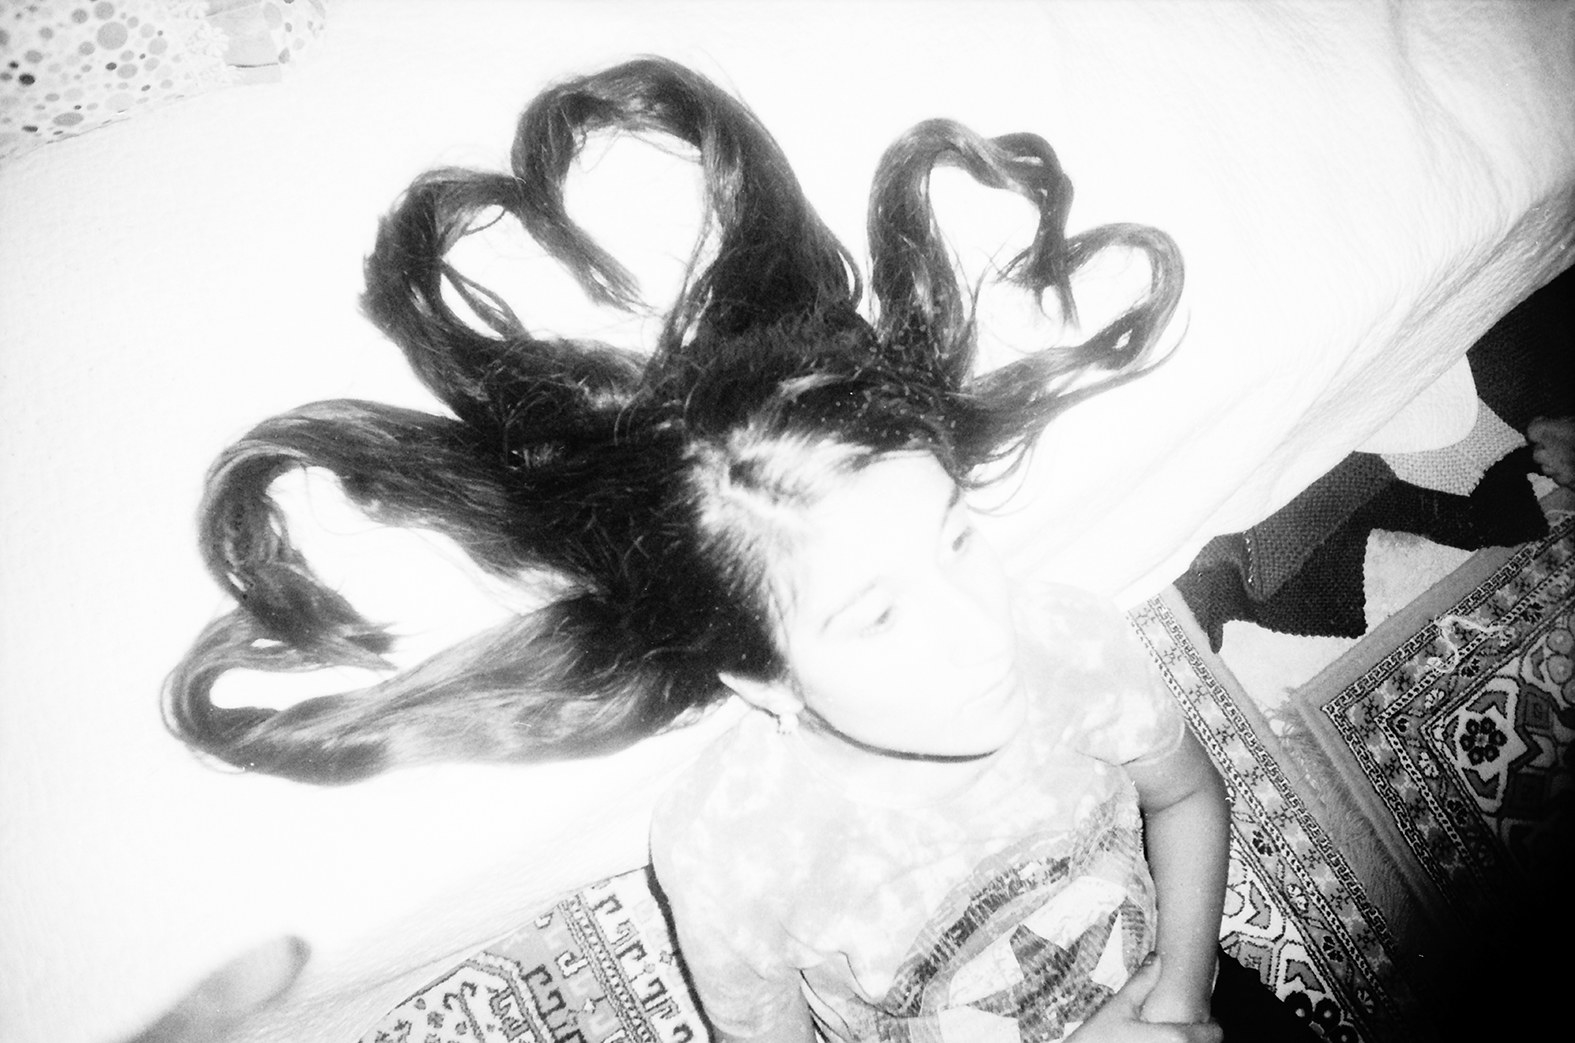 A girl sits on the edge of the bed with her long hair arranged to form hearts